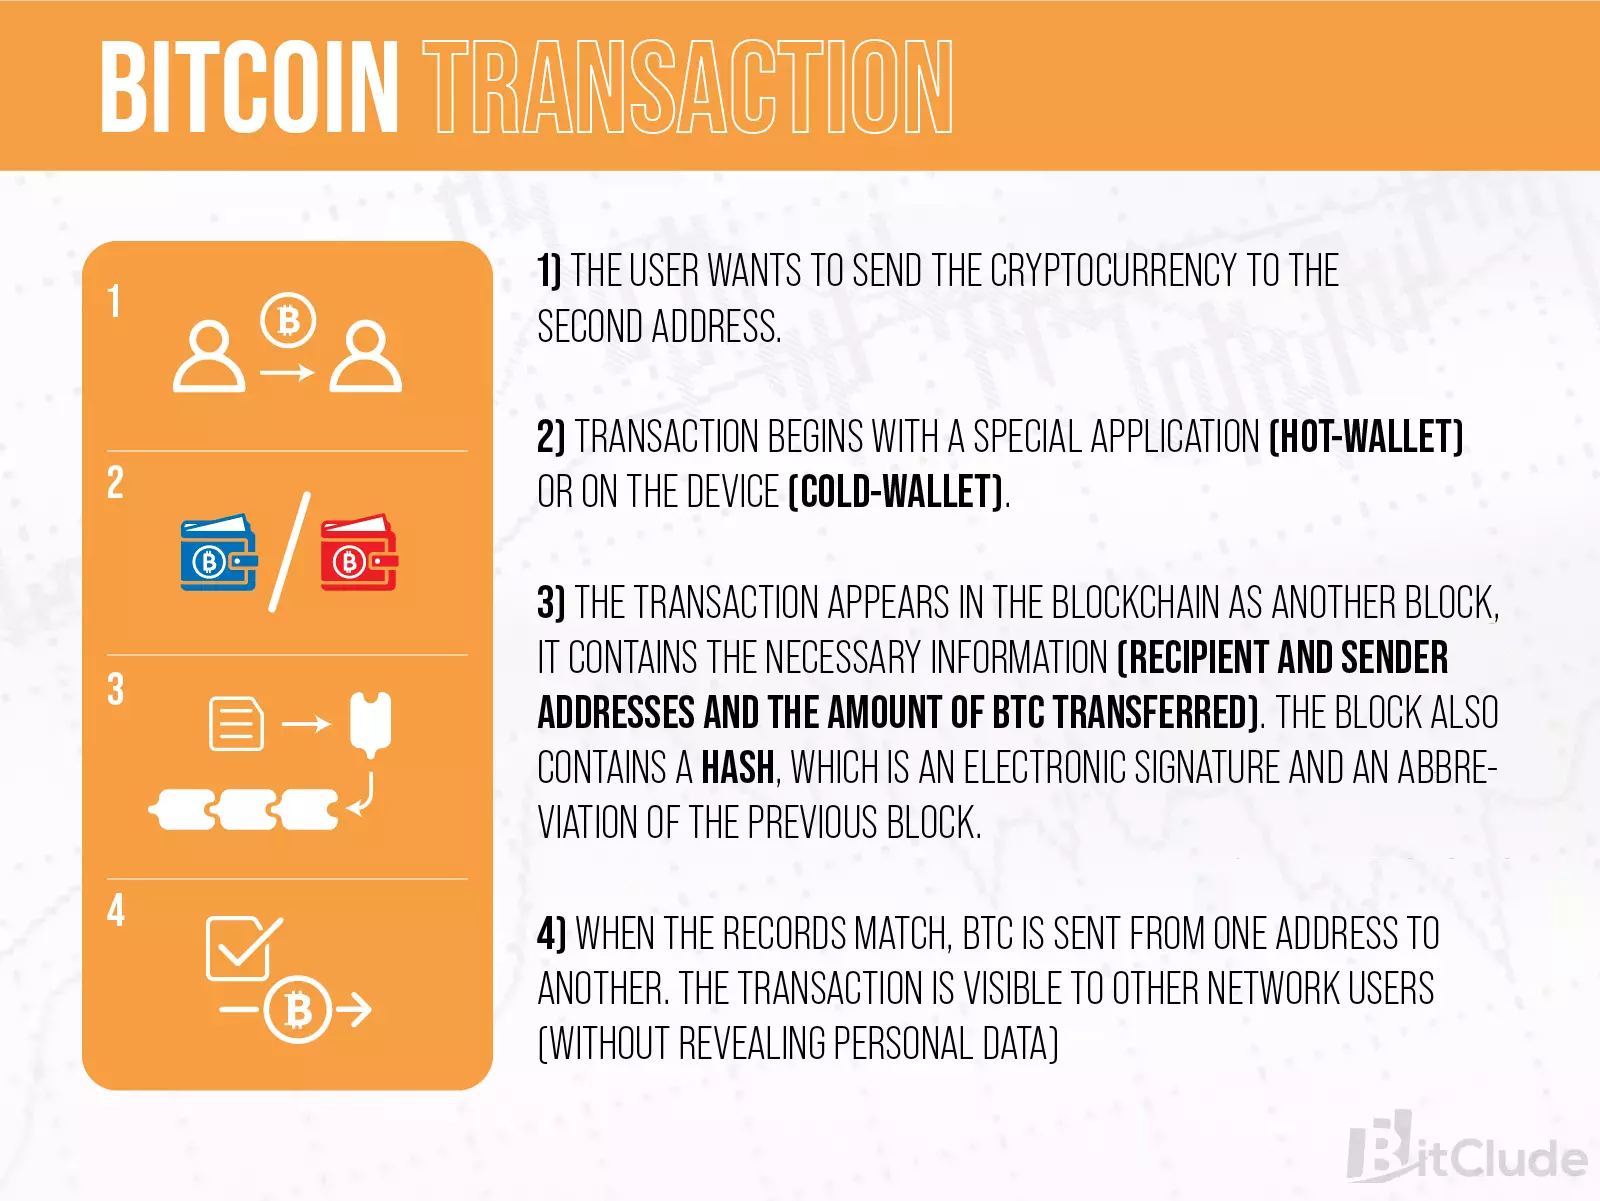 Bitcoin Blockchain transactions can be divided into 4 steps. Finally, after transferring funds from the wallet, the entry appears in the block, signed with a hash.